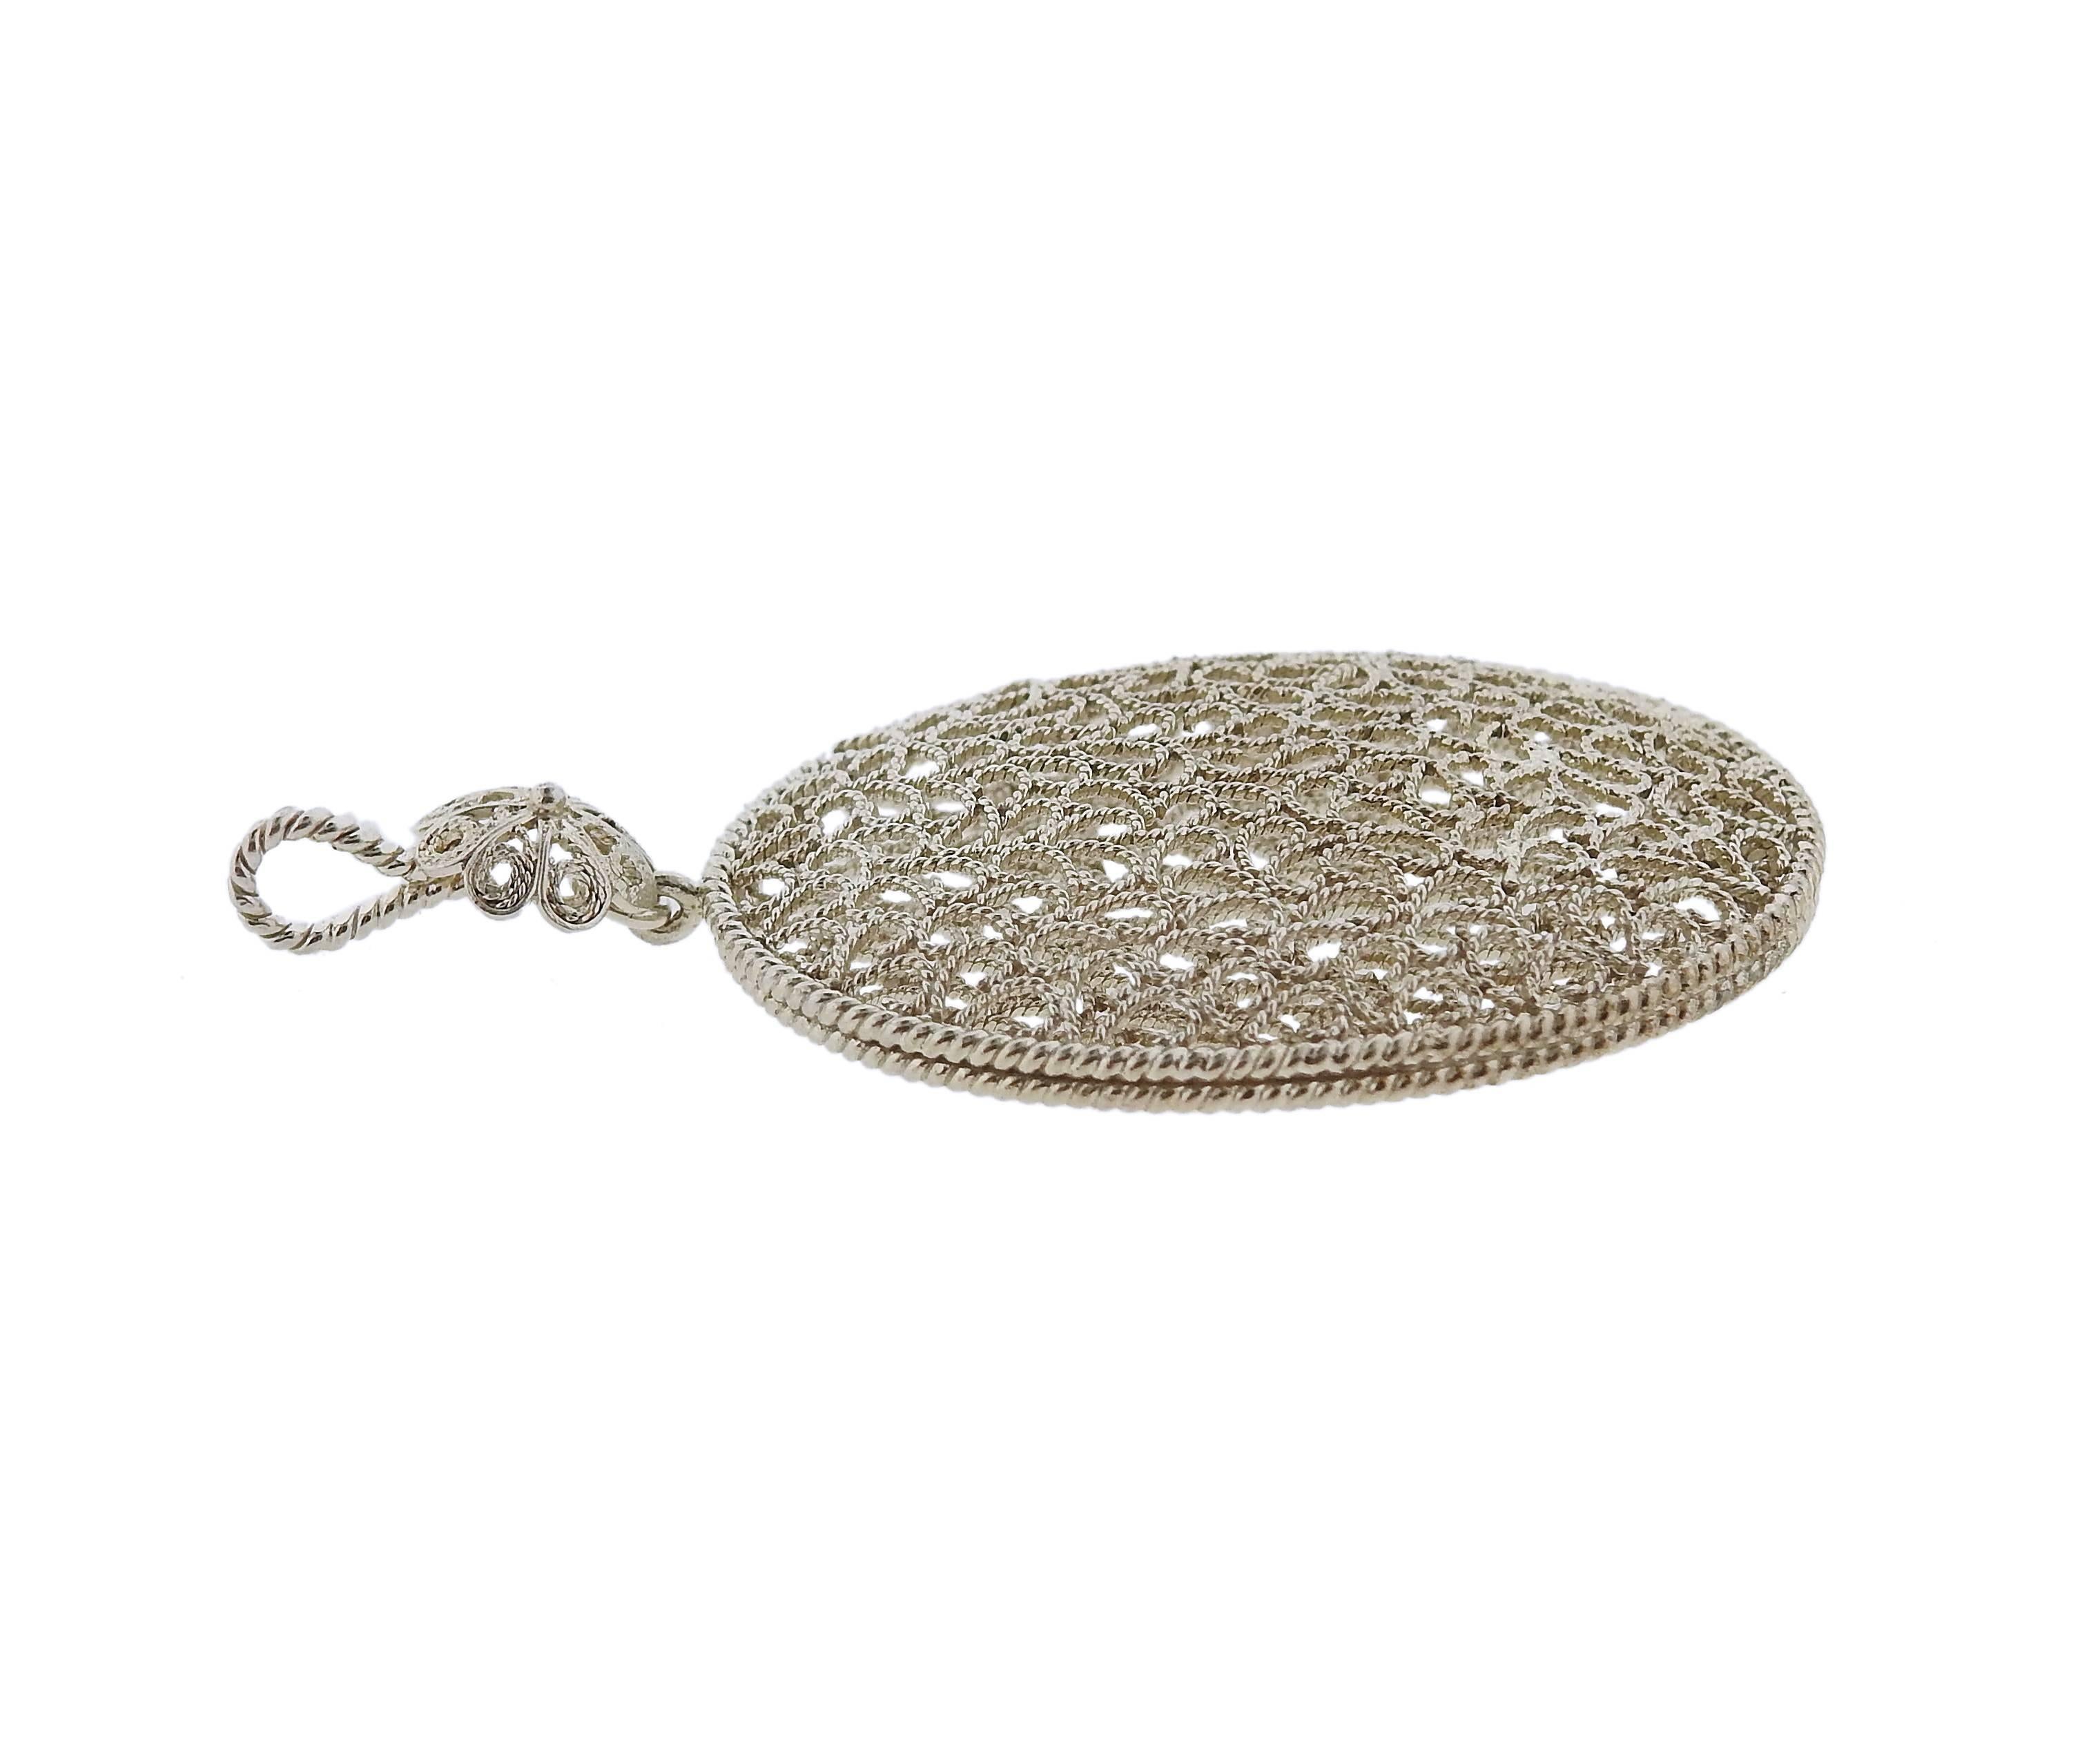 A Buccellati Sterling Silver Openwork floral oval pendant. Pendant measures 50mm including bale X 29mm. Weight is 5.4 grams, marked Buccellati 925 italy.  